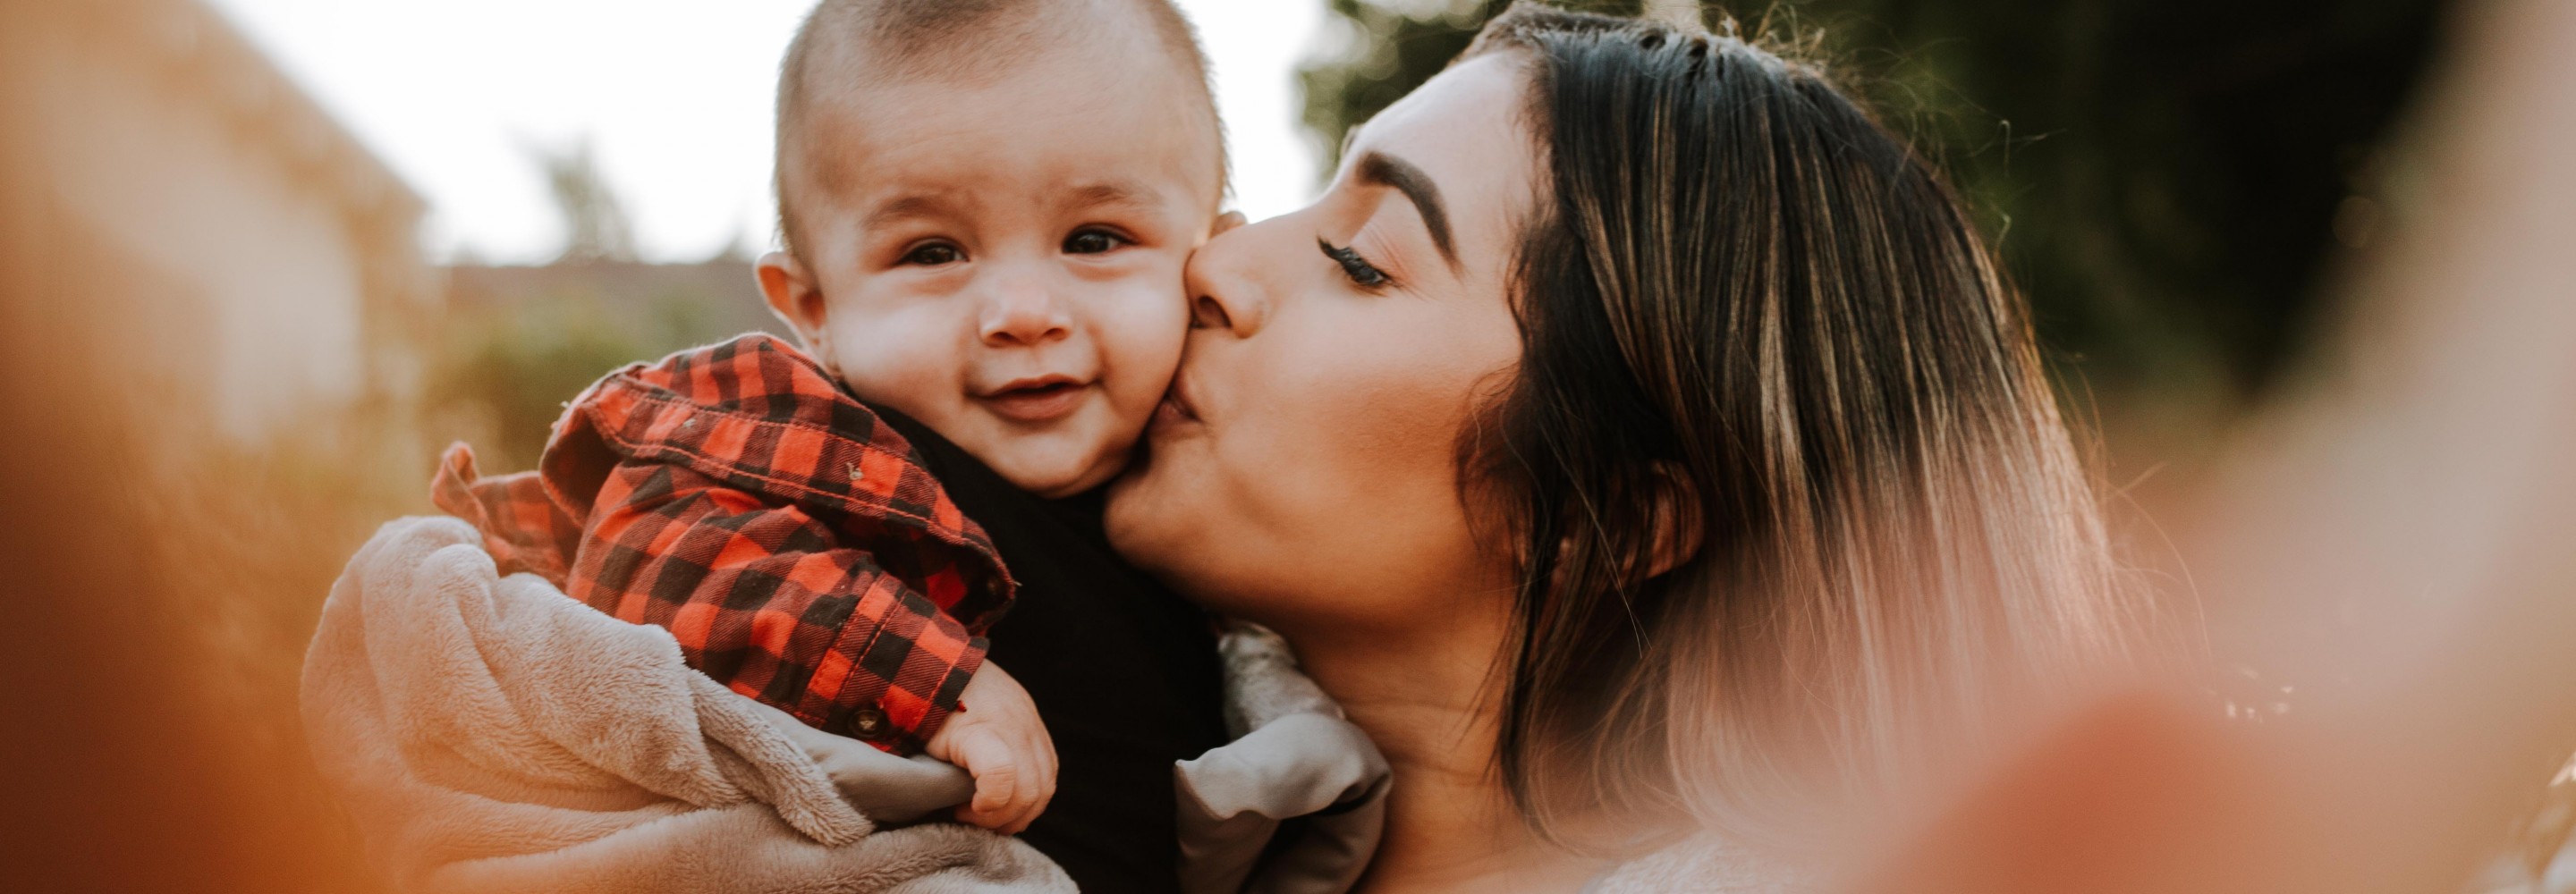 Woman kissing a smiling baby on the cheek; Photo by Omar Lopez on Unsplash